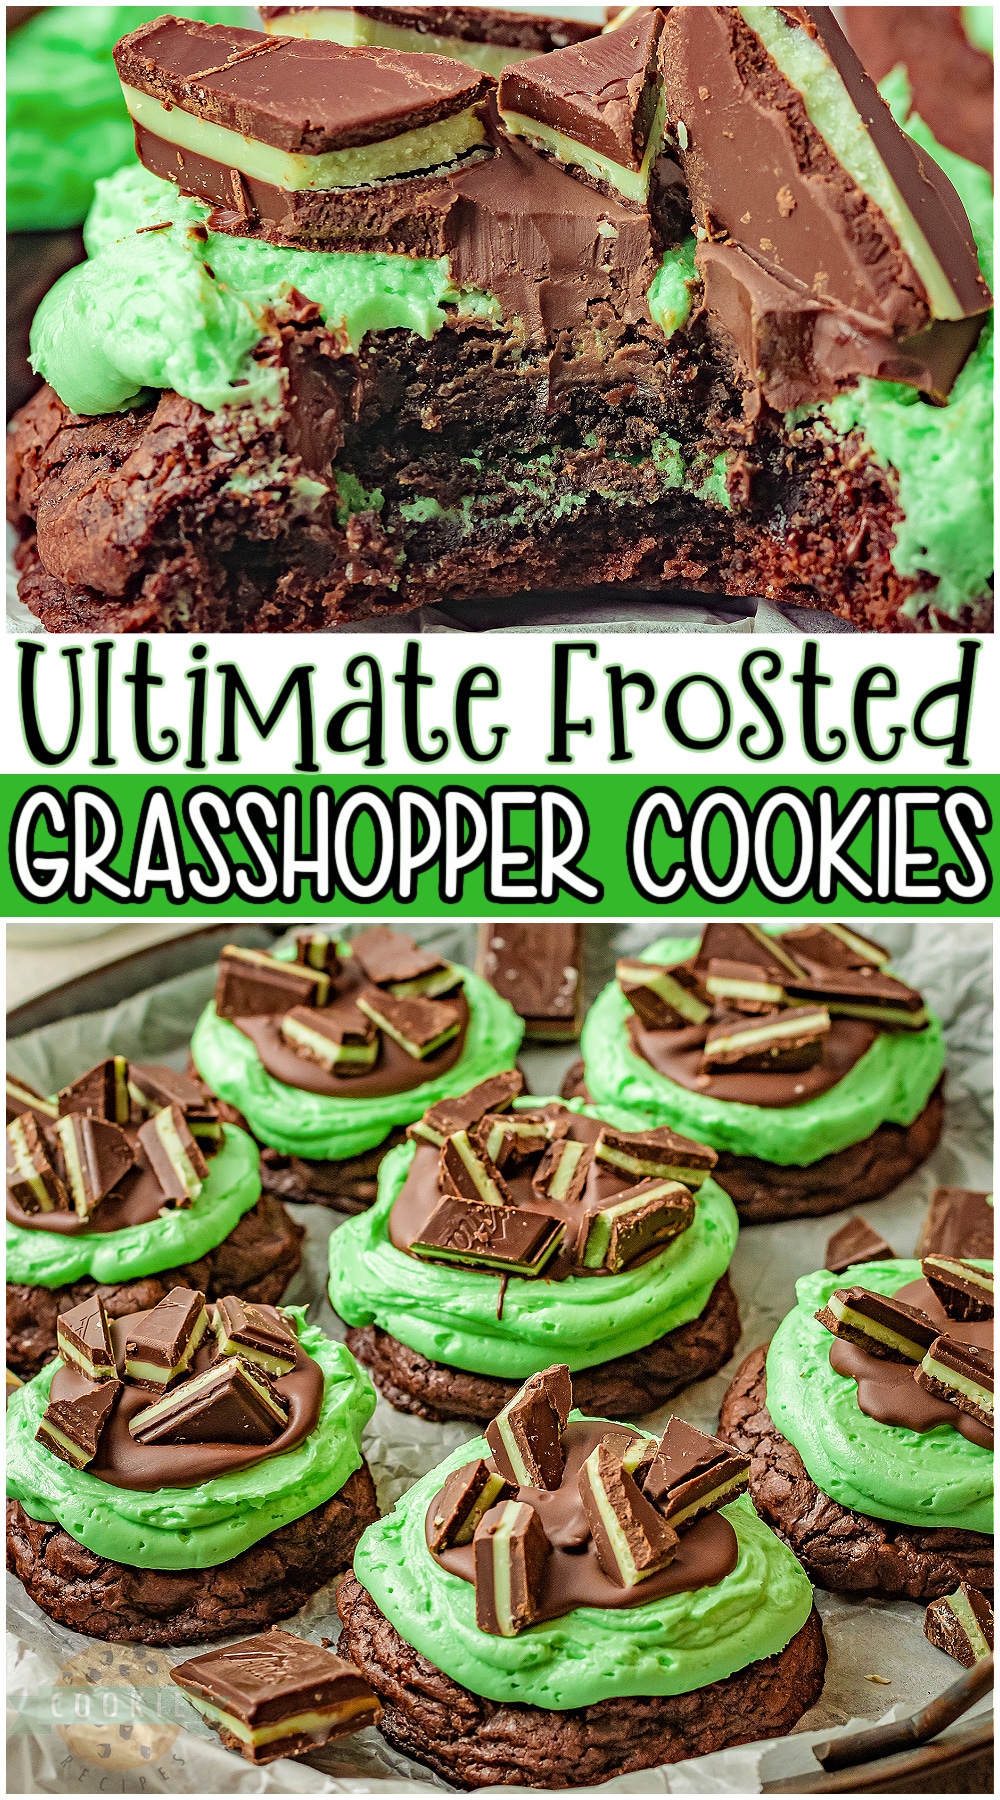 Grasshopper cookies are fudgy brownie cookies stuffed with a Mint Oreo and topped with the ultimate mint chocolate frosting! Indulgent mint chocolate cookies perfect for the holidays. #mint #cookies #chocolate #grasshopper #baking #easyrecipe from FAMILY COOKIE RECIPES via @buttergirls